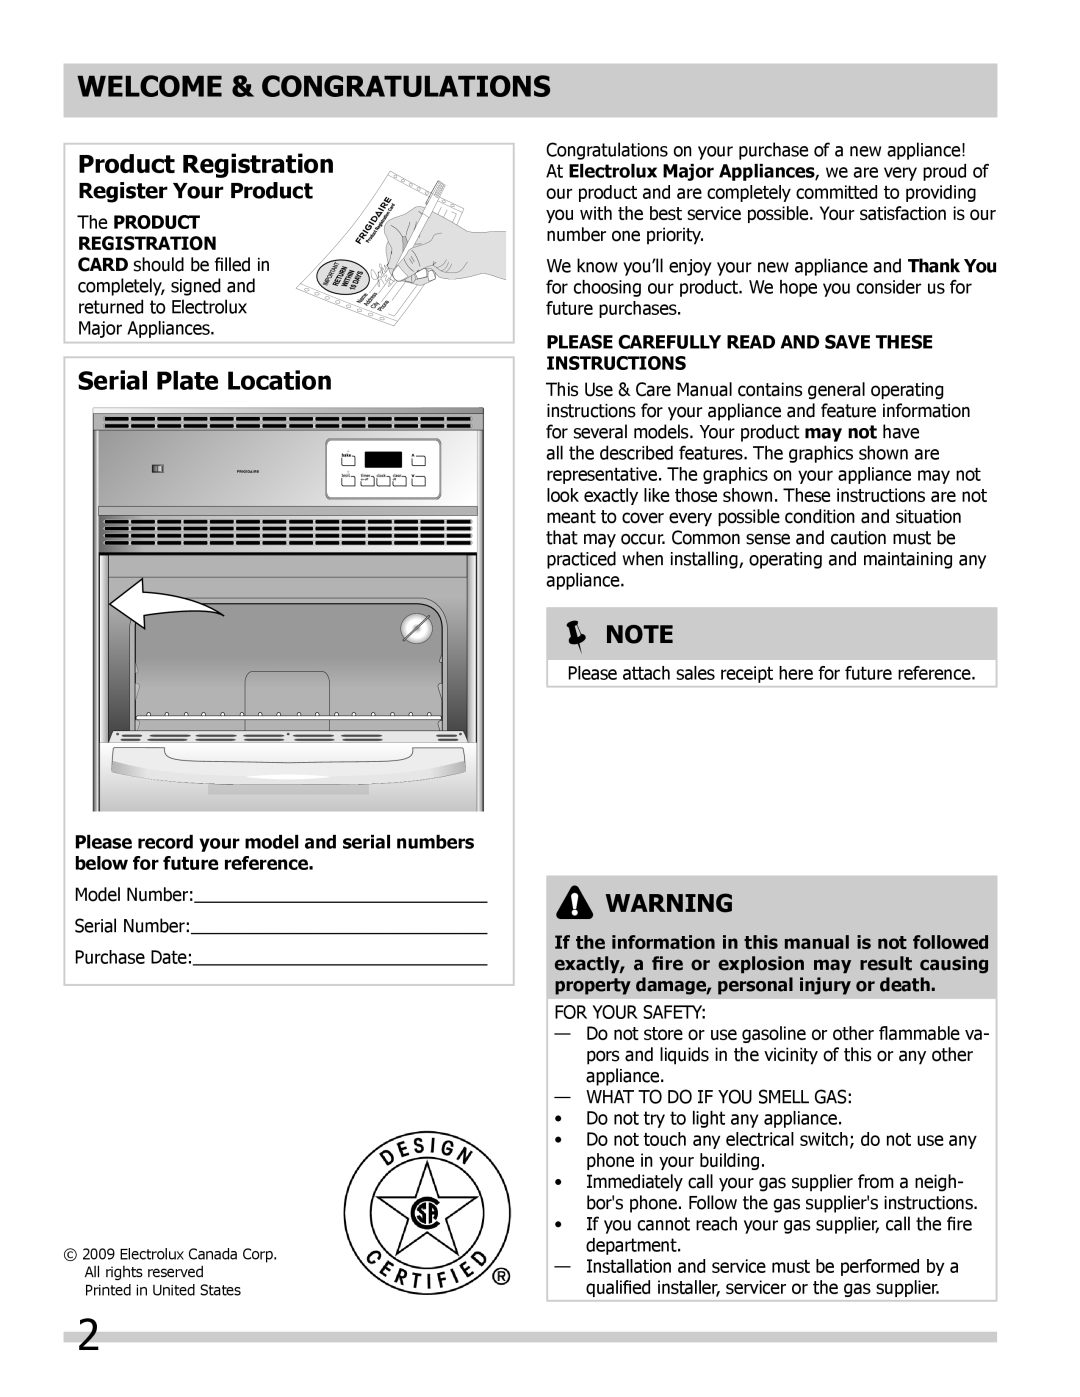 Frigidaire 318200964 Welcome & Congratulations, Product Registration, Serial Plate Location,  Note, Register Your Product 